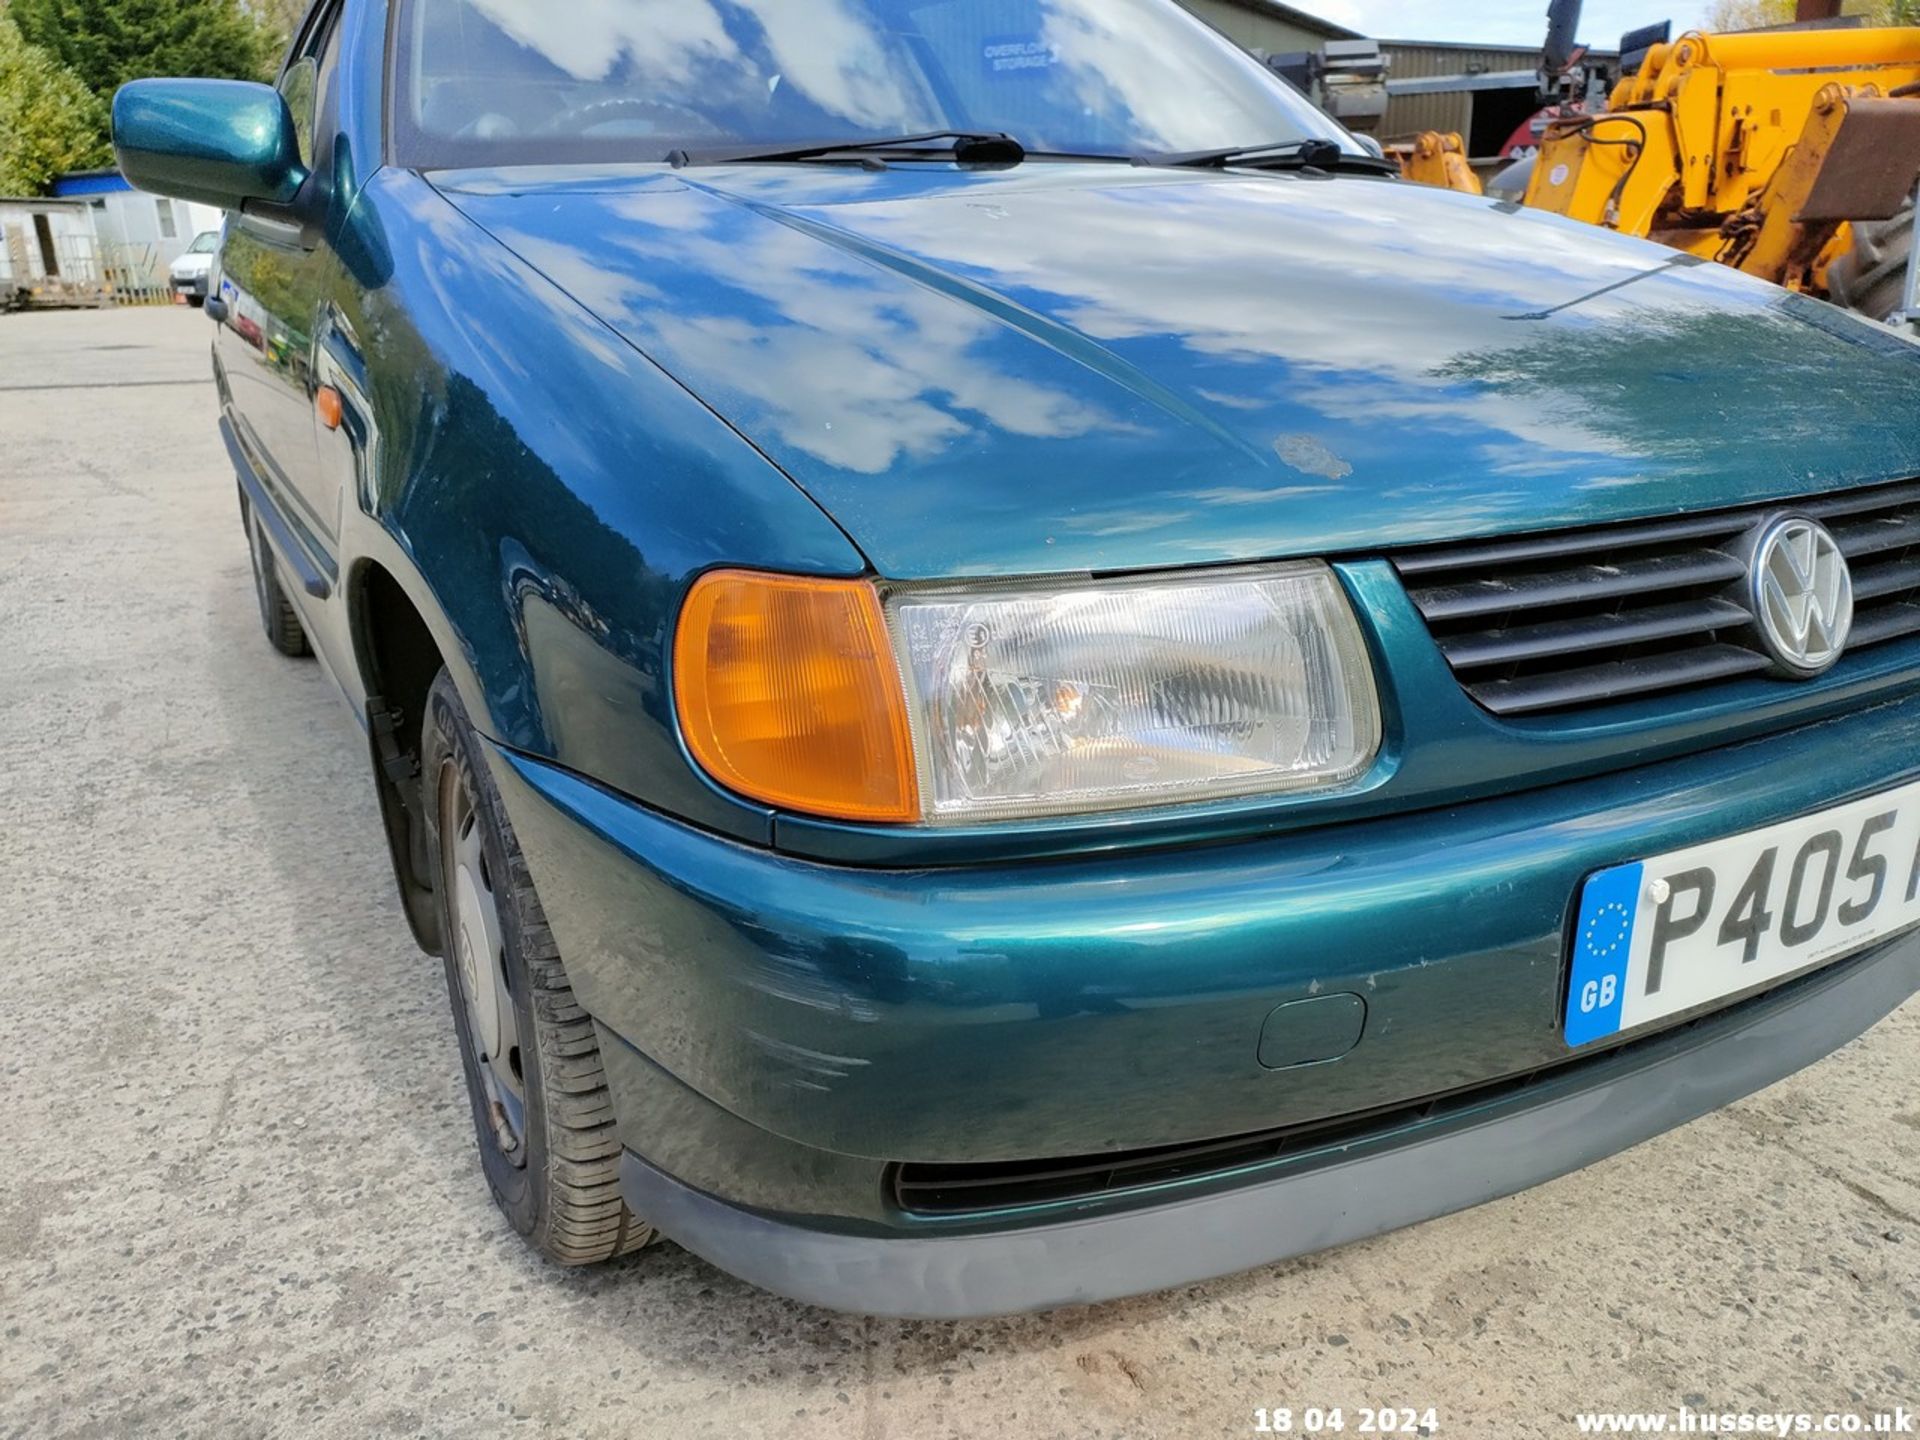 1997 VOLKSWAGEN POLO 1.4 CL AUTO - 1390cc 3dr Hatchback (Green, 68k) - Image 6 of 60